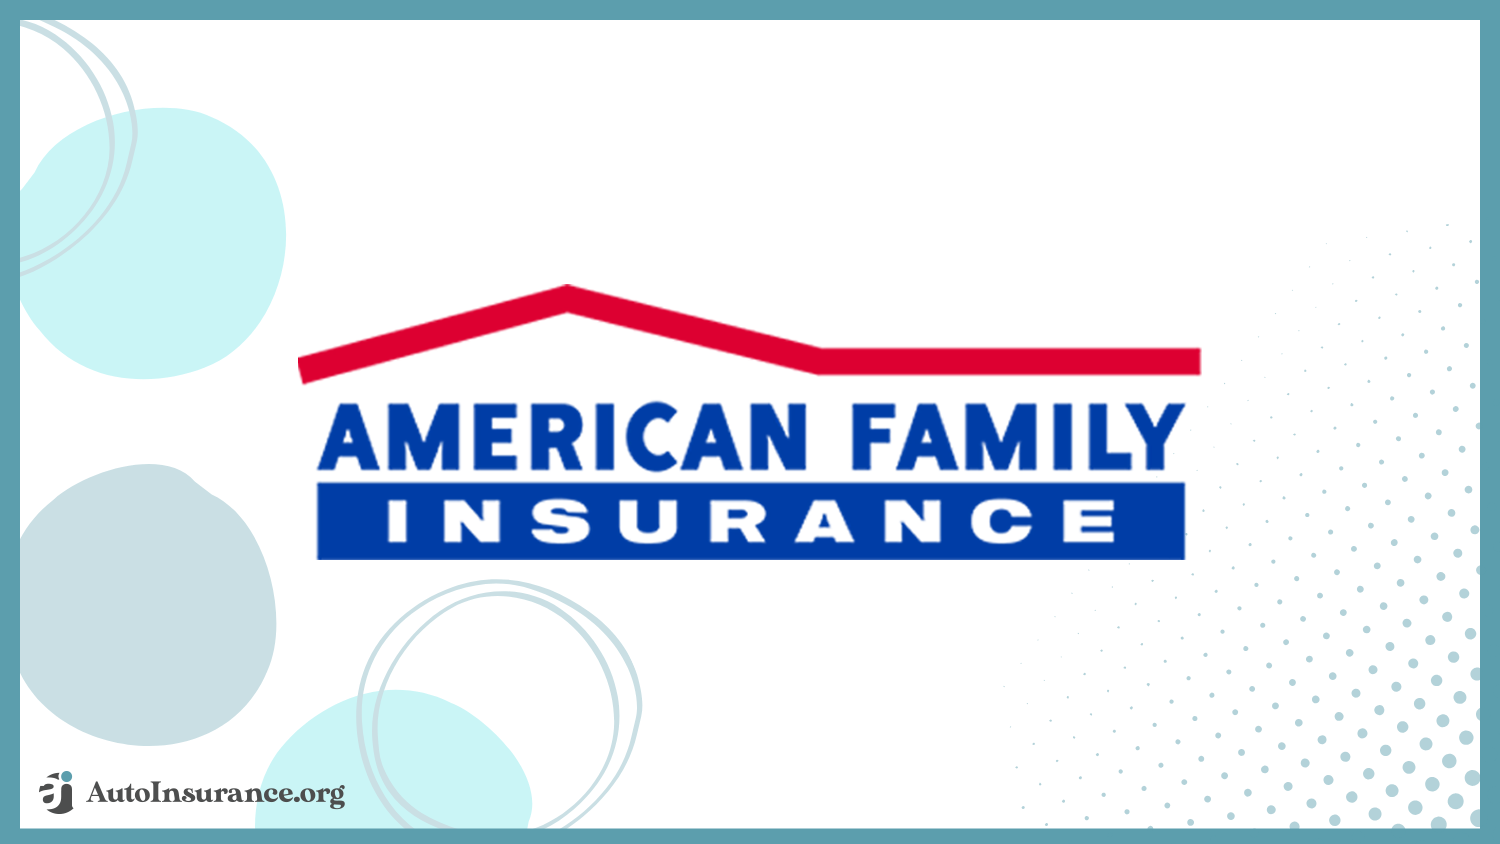 Cheap Auto Insurance For Bus Drivers: American Family